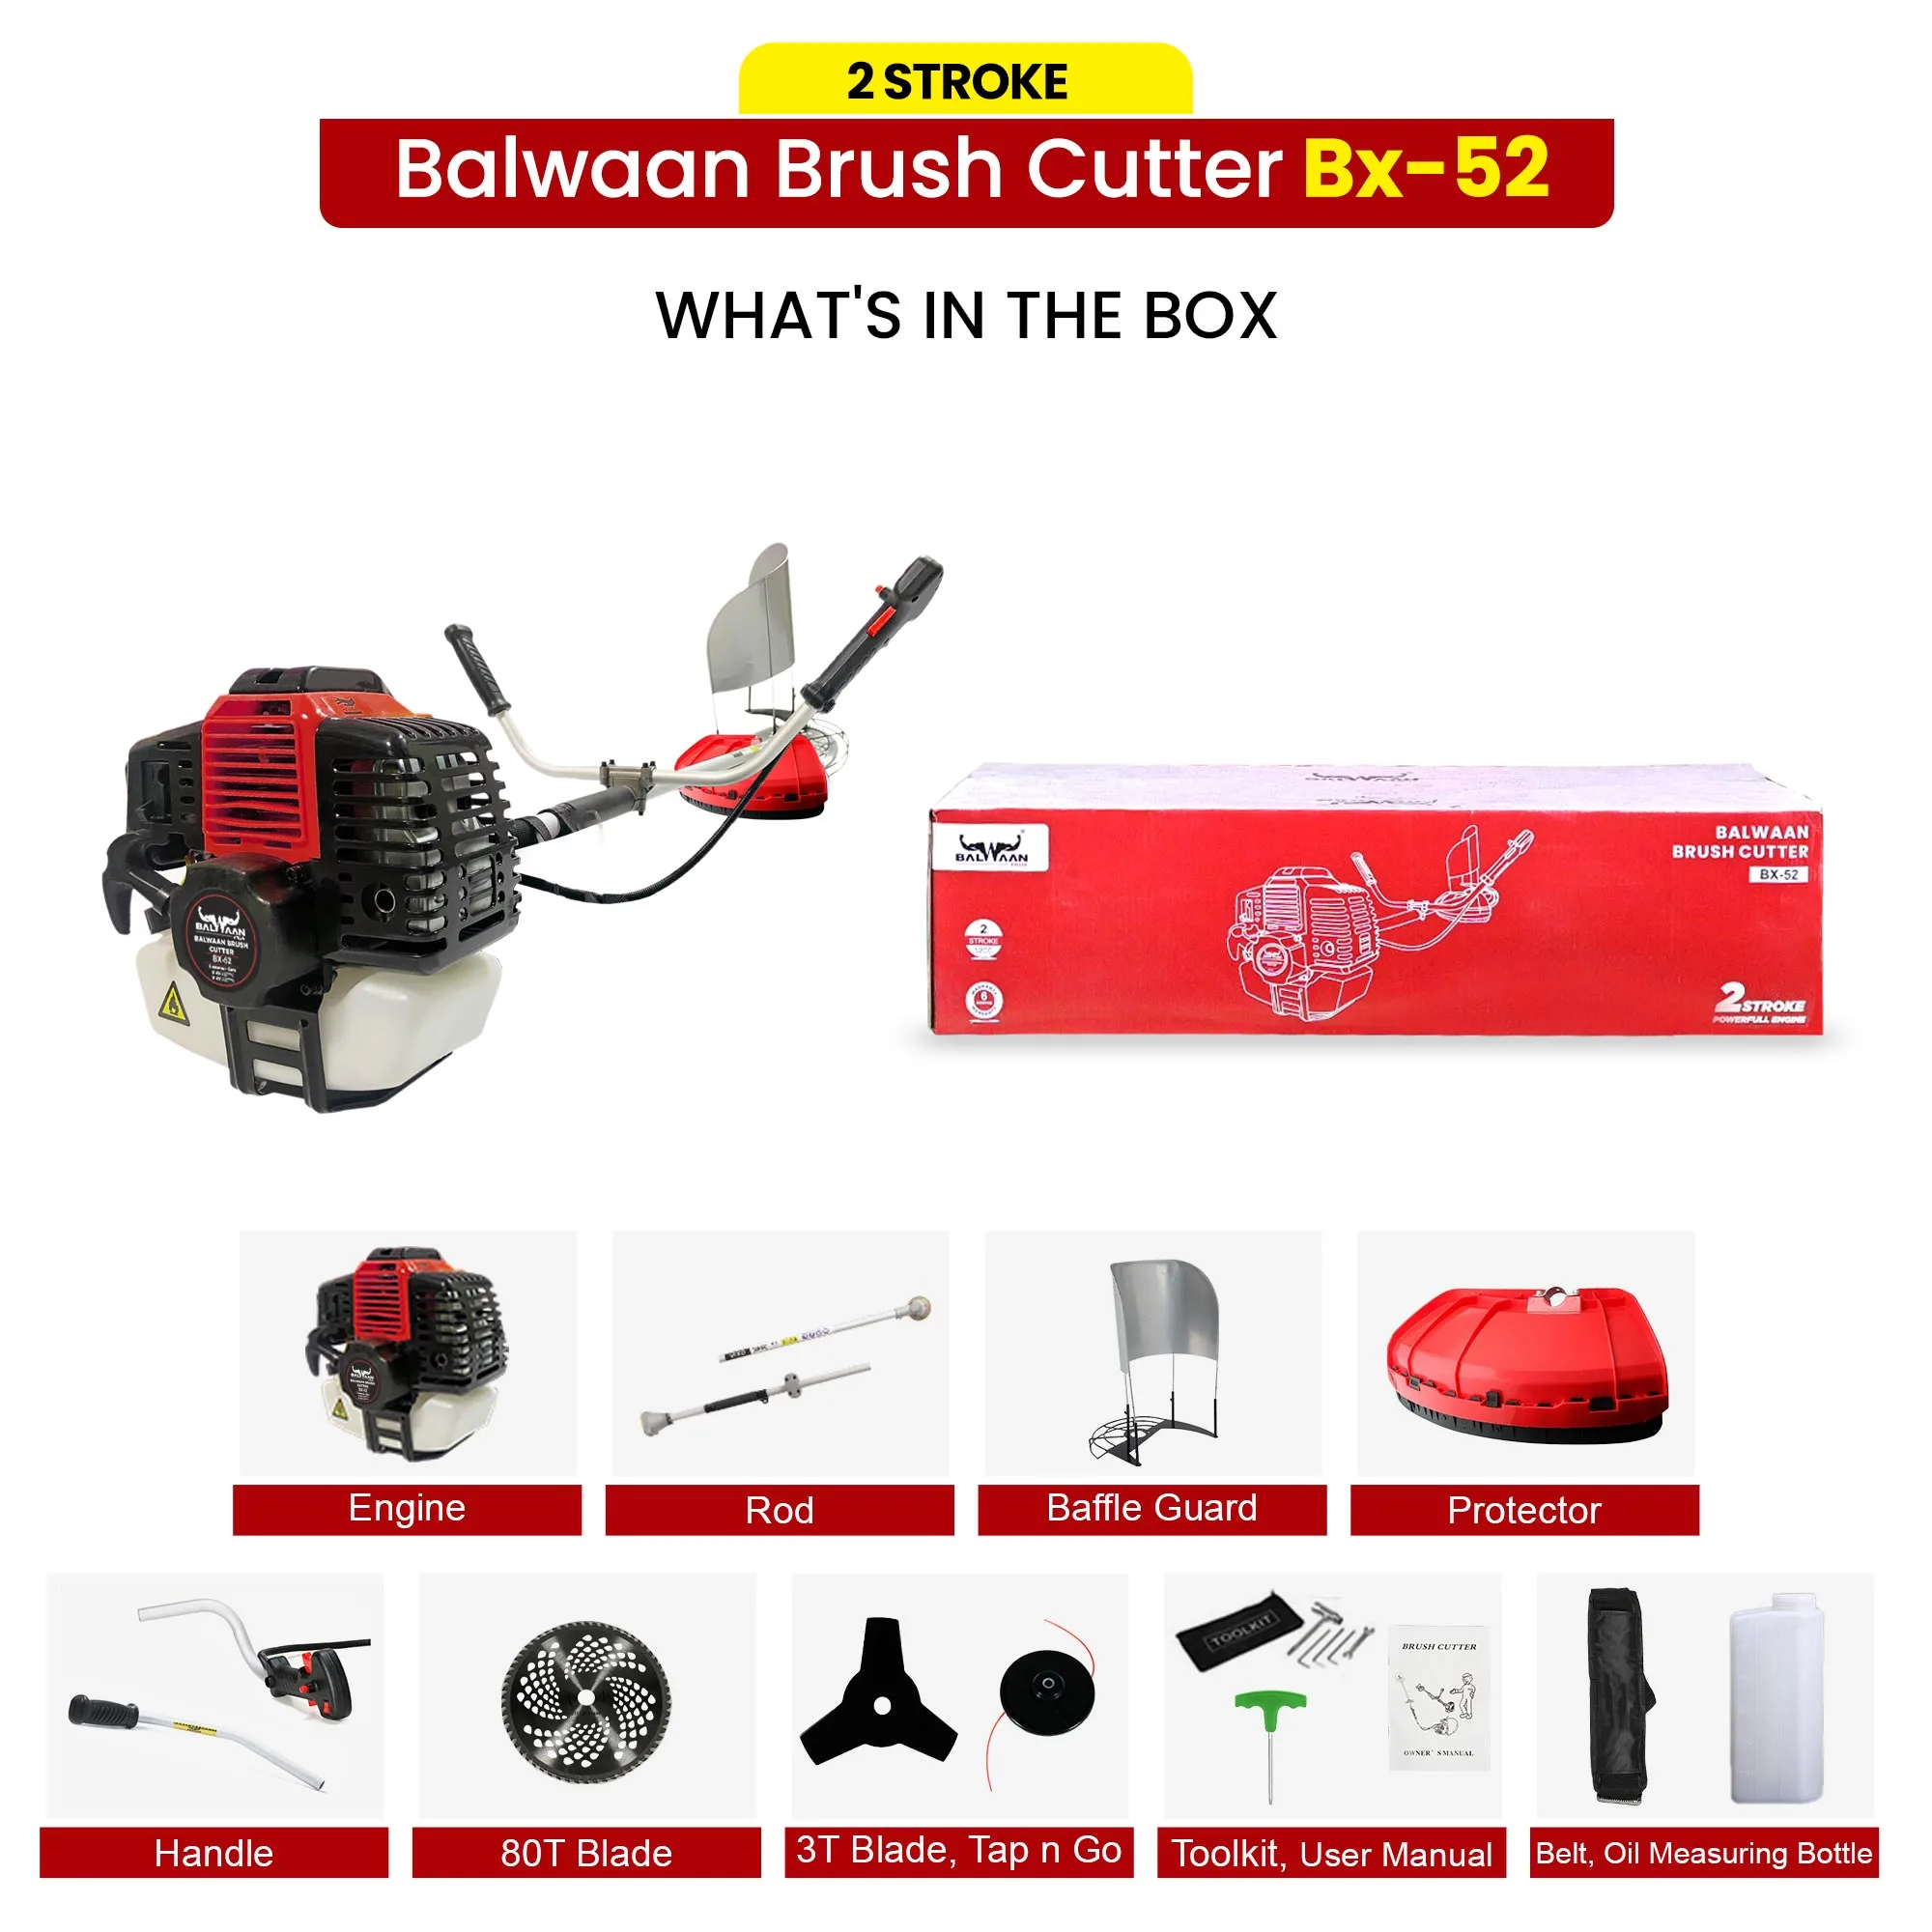 items-that-comes-with-Balwaan-brush-cutter-bx-52